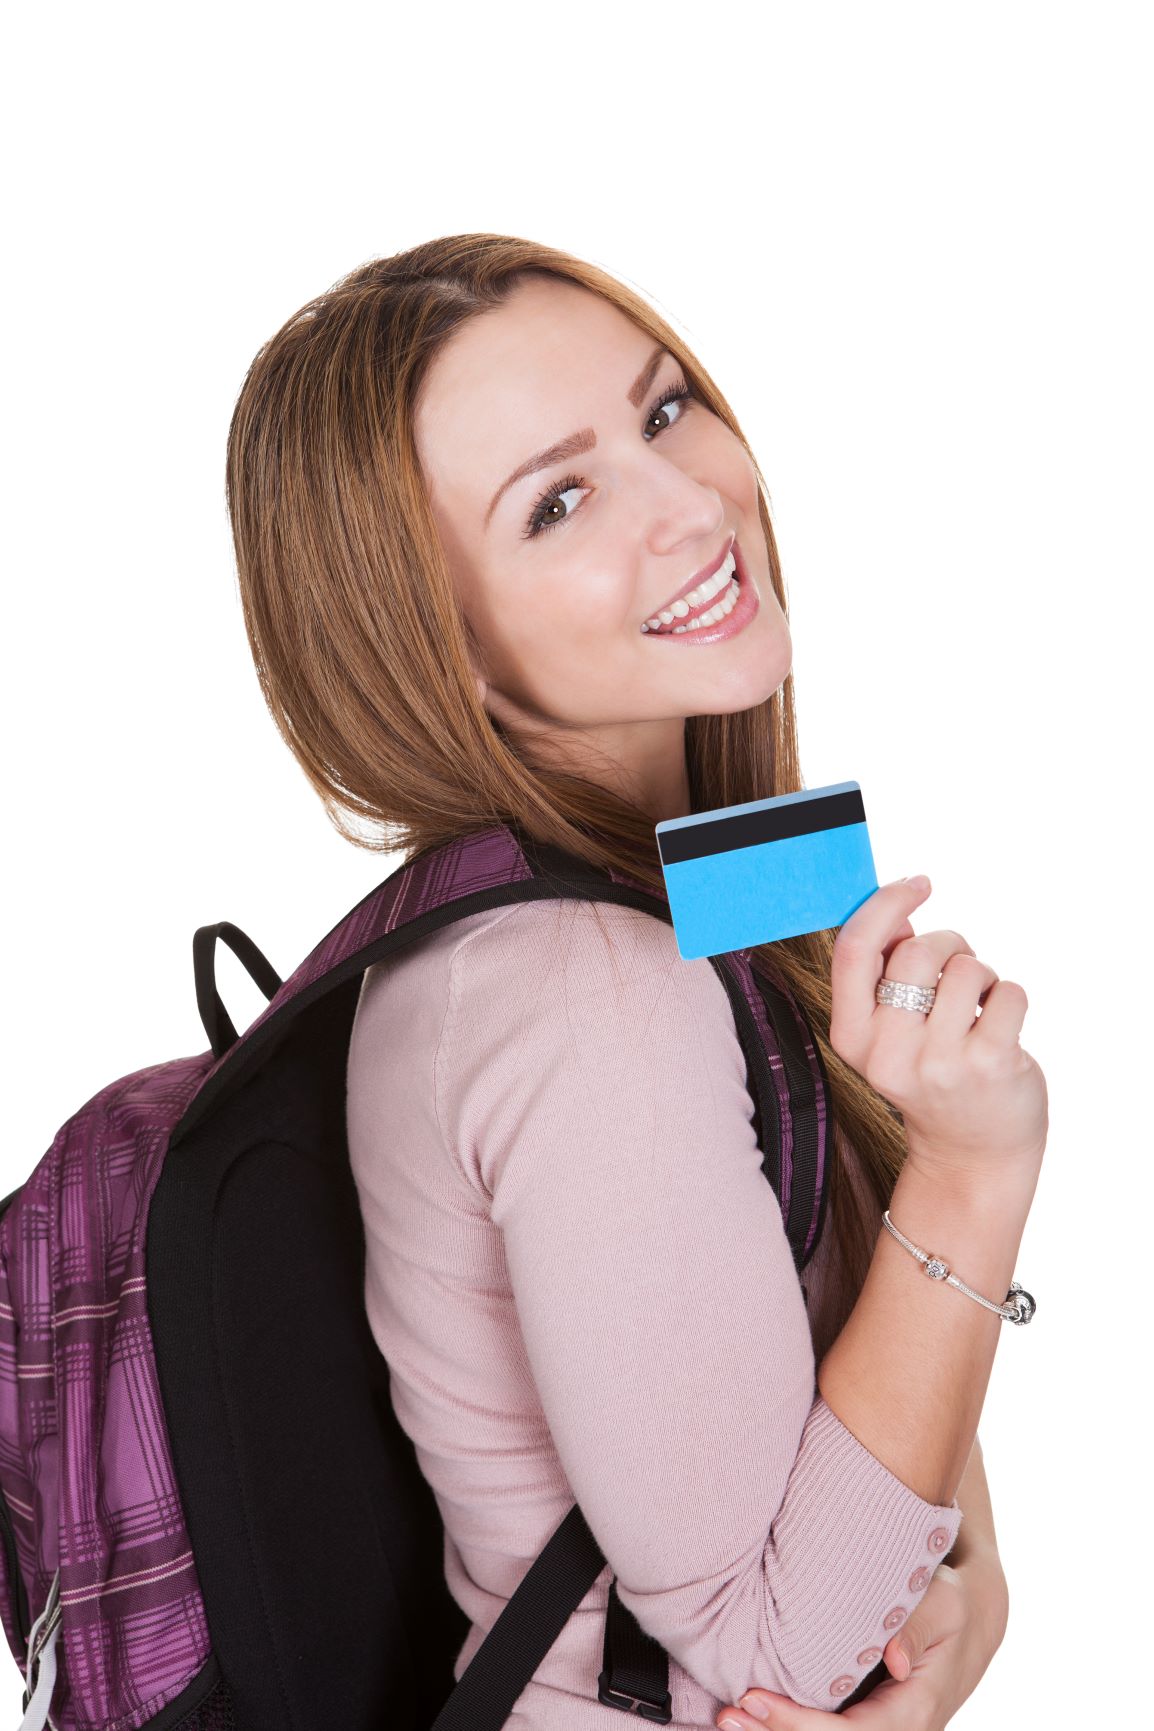 Should College-Bound Kids Have Their Own Credit Cards?